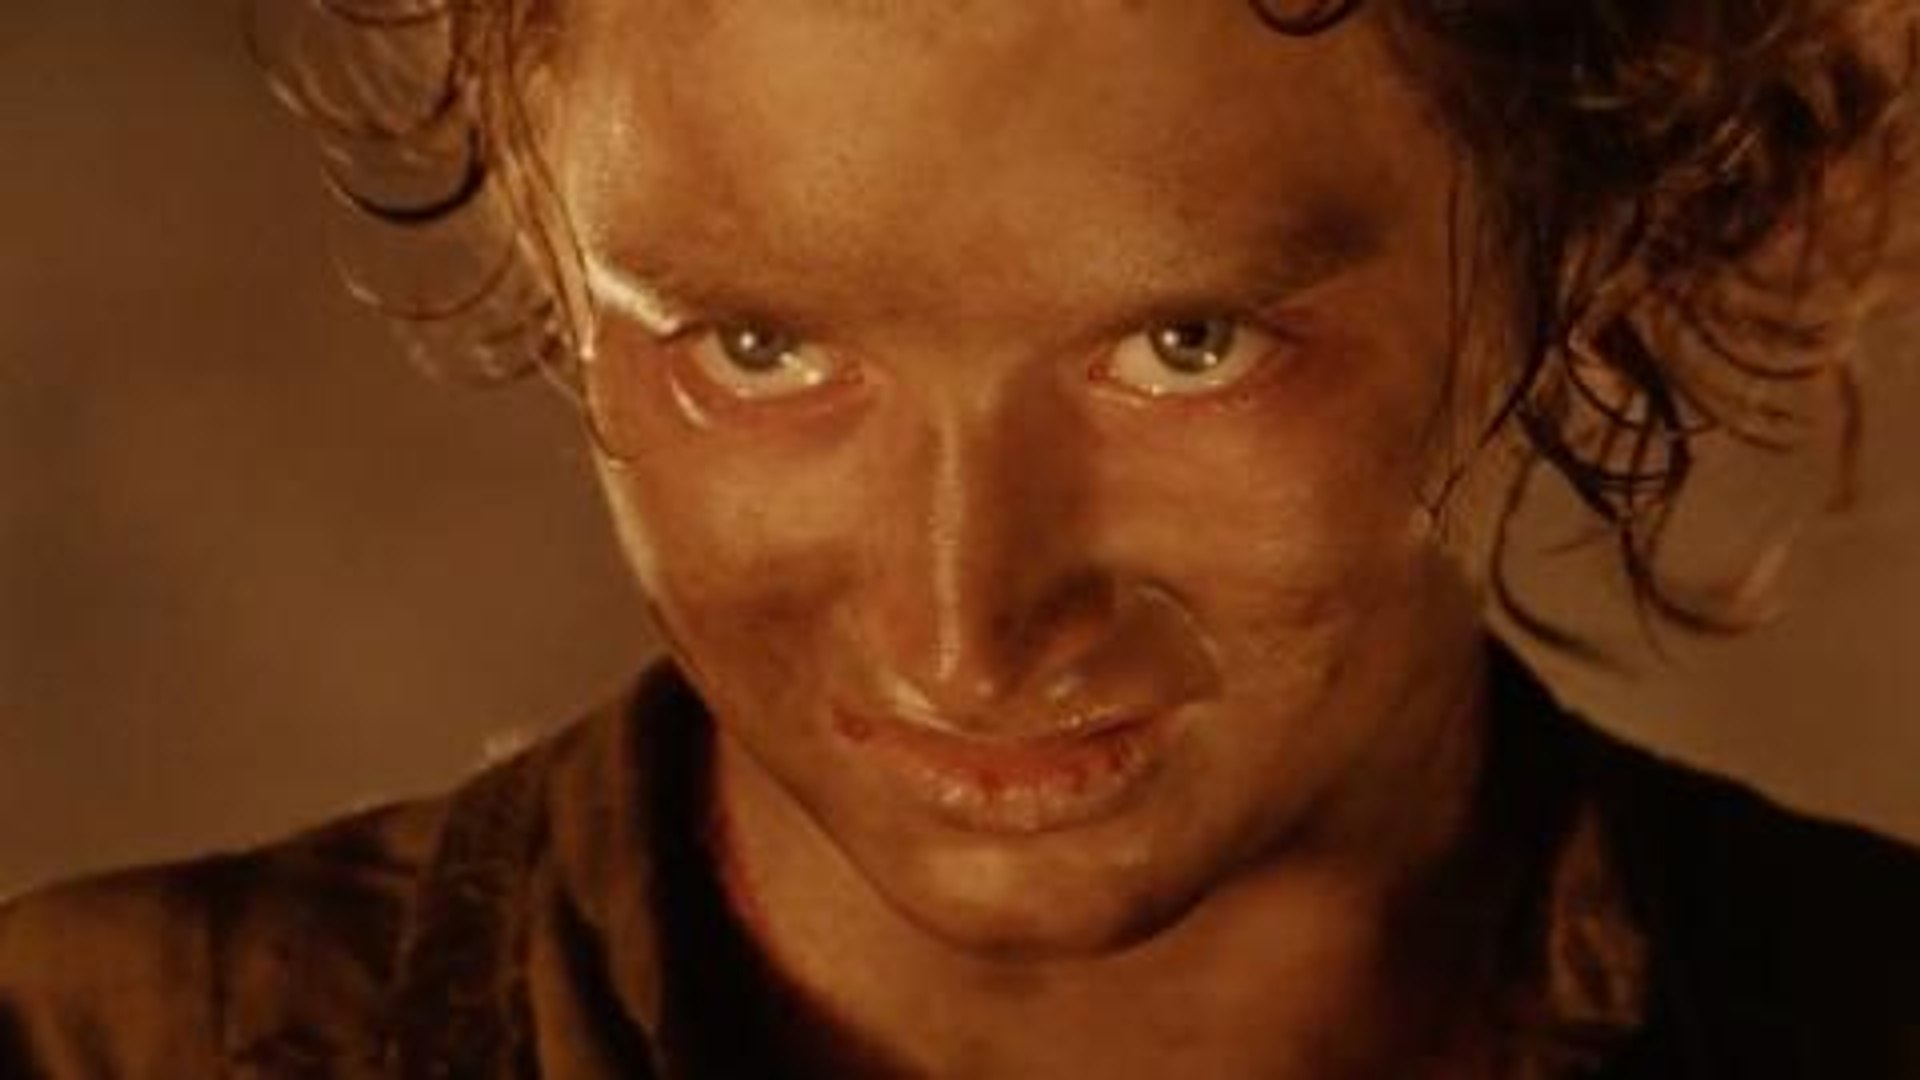 Top 10 The Lord of the Rings and The Hobbit Moments - video Dailymotion